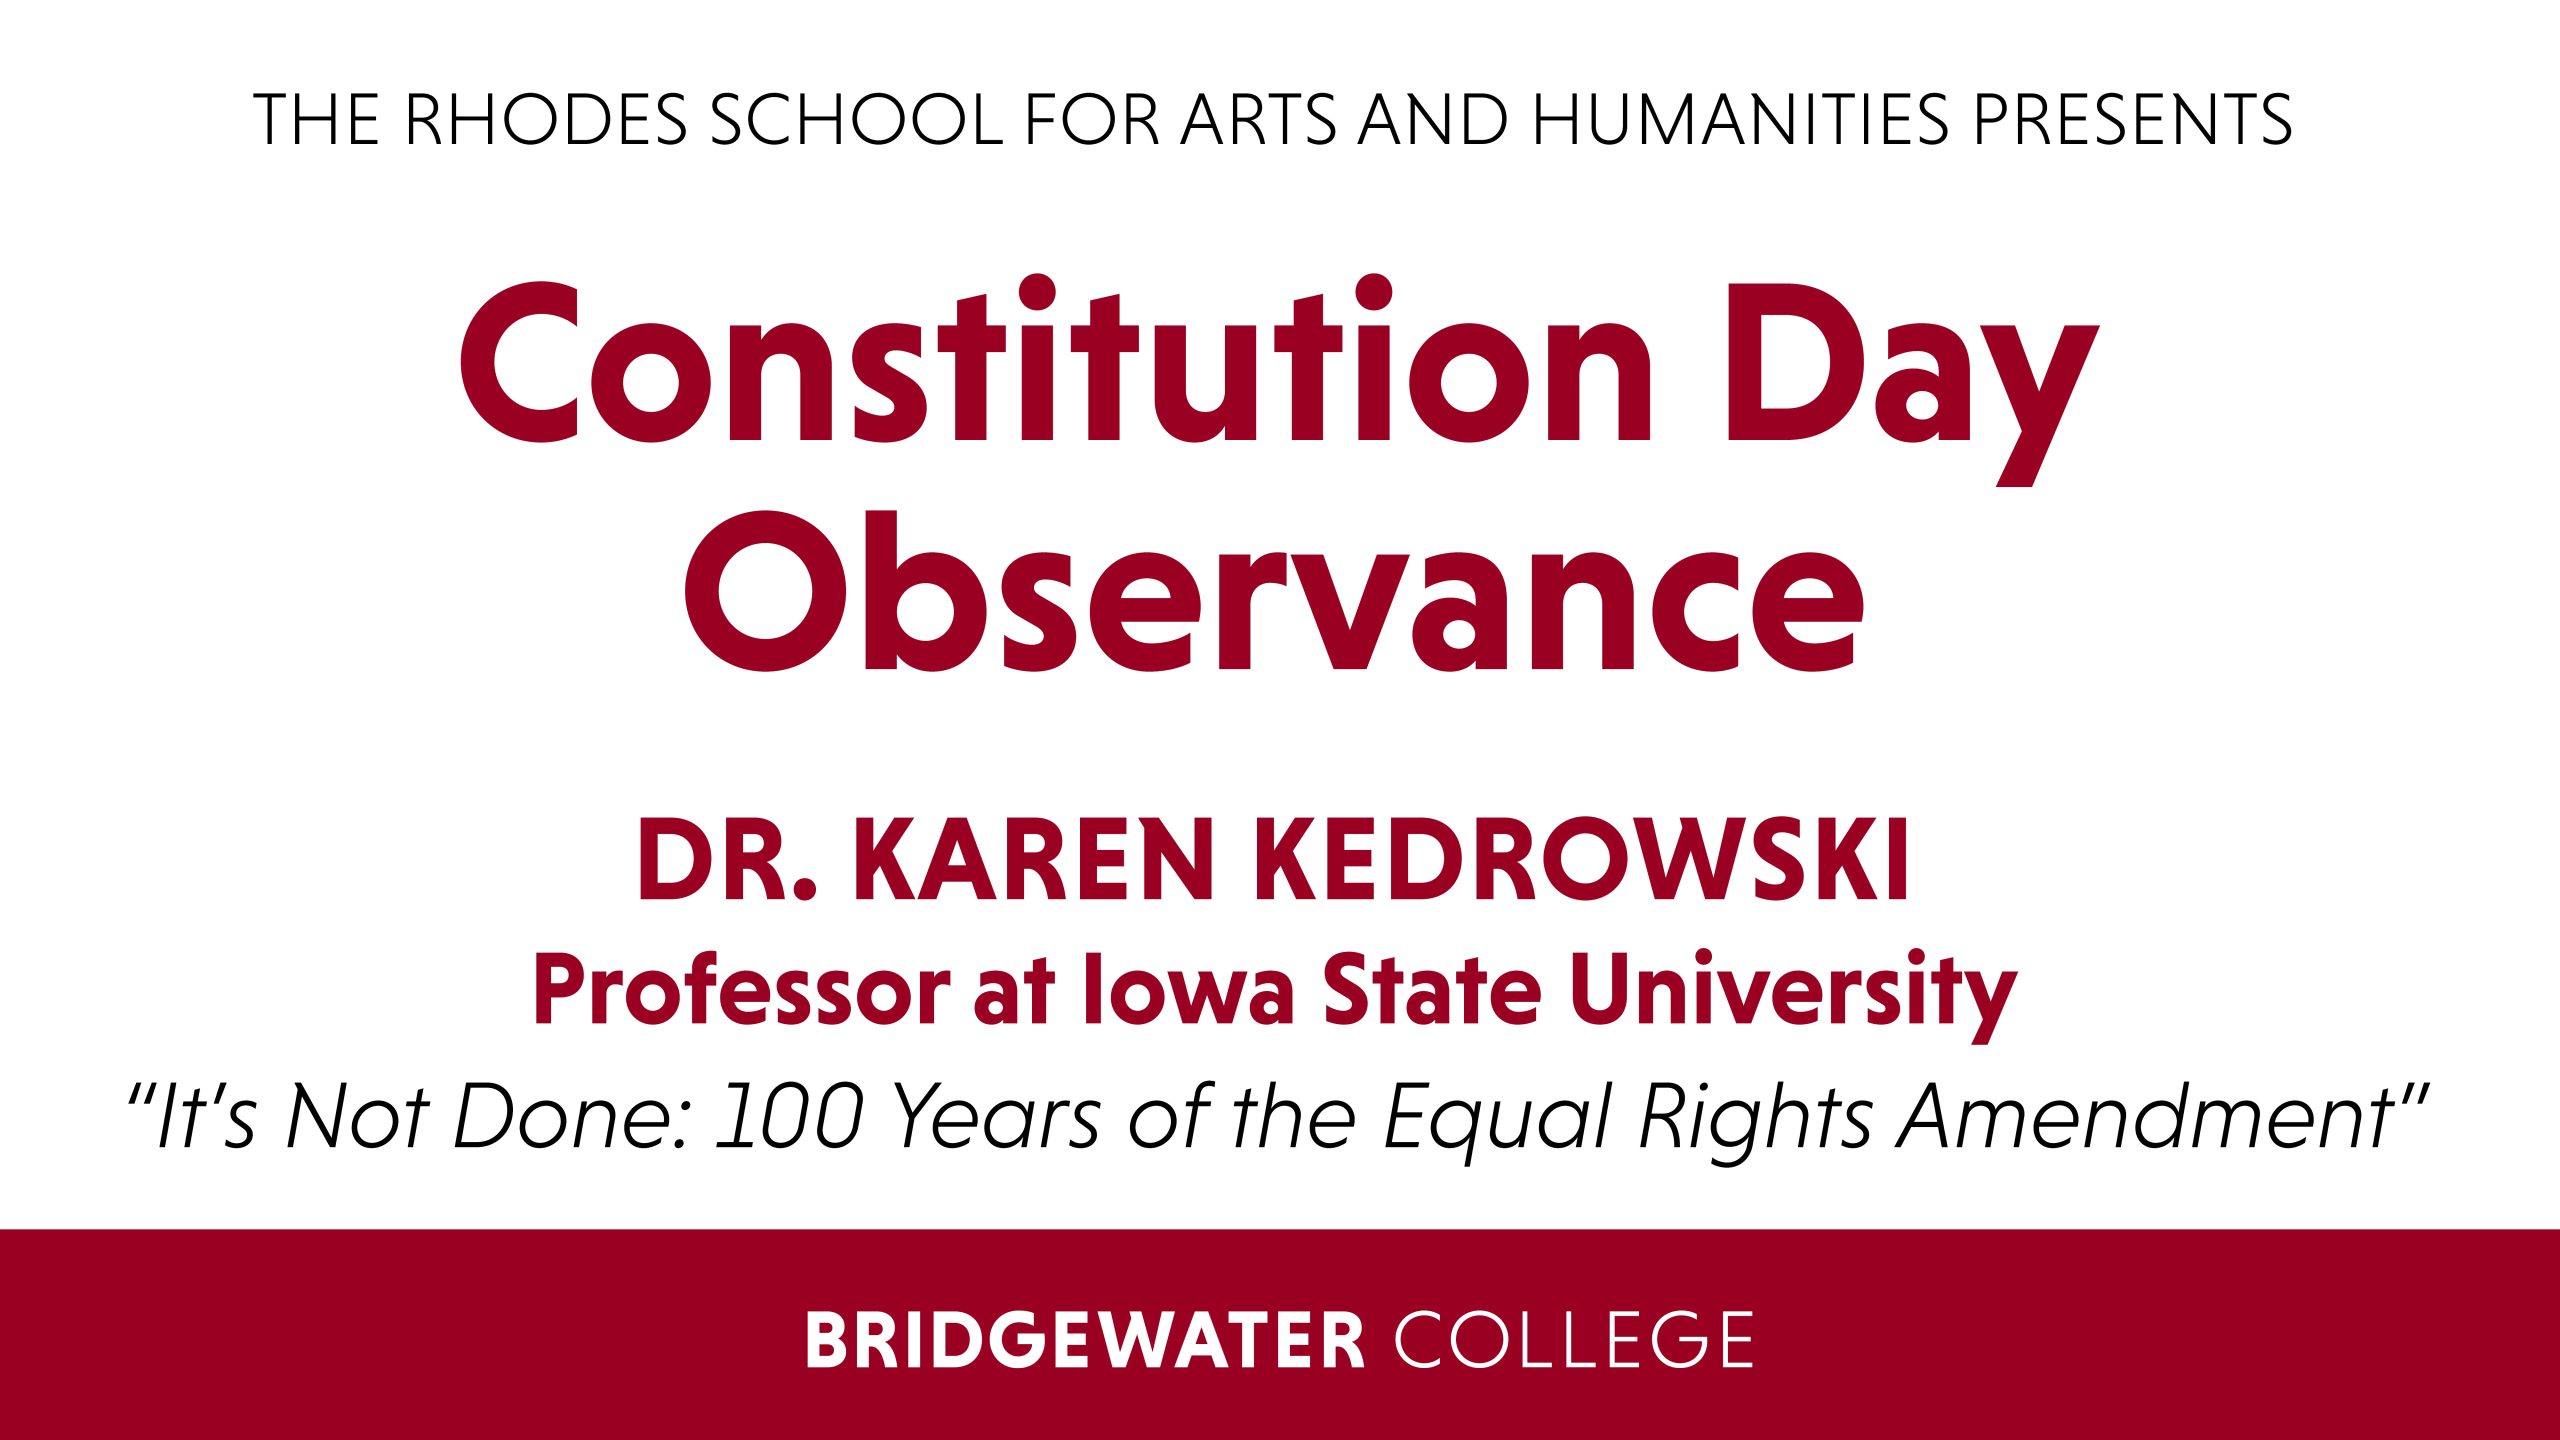 The Rhodes School for Arts and Humanities Presents Constitution Day Observance Tuesday, September 20 at 5 p.m. Dr. Karen Kedrowski Professor at Iowa State University "It's Not Done: 100 Years of the Equal Rights Amendment" Bridgewater College. Virtual lecture on Zoom. Register at bridgewater.edu/constitutionday